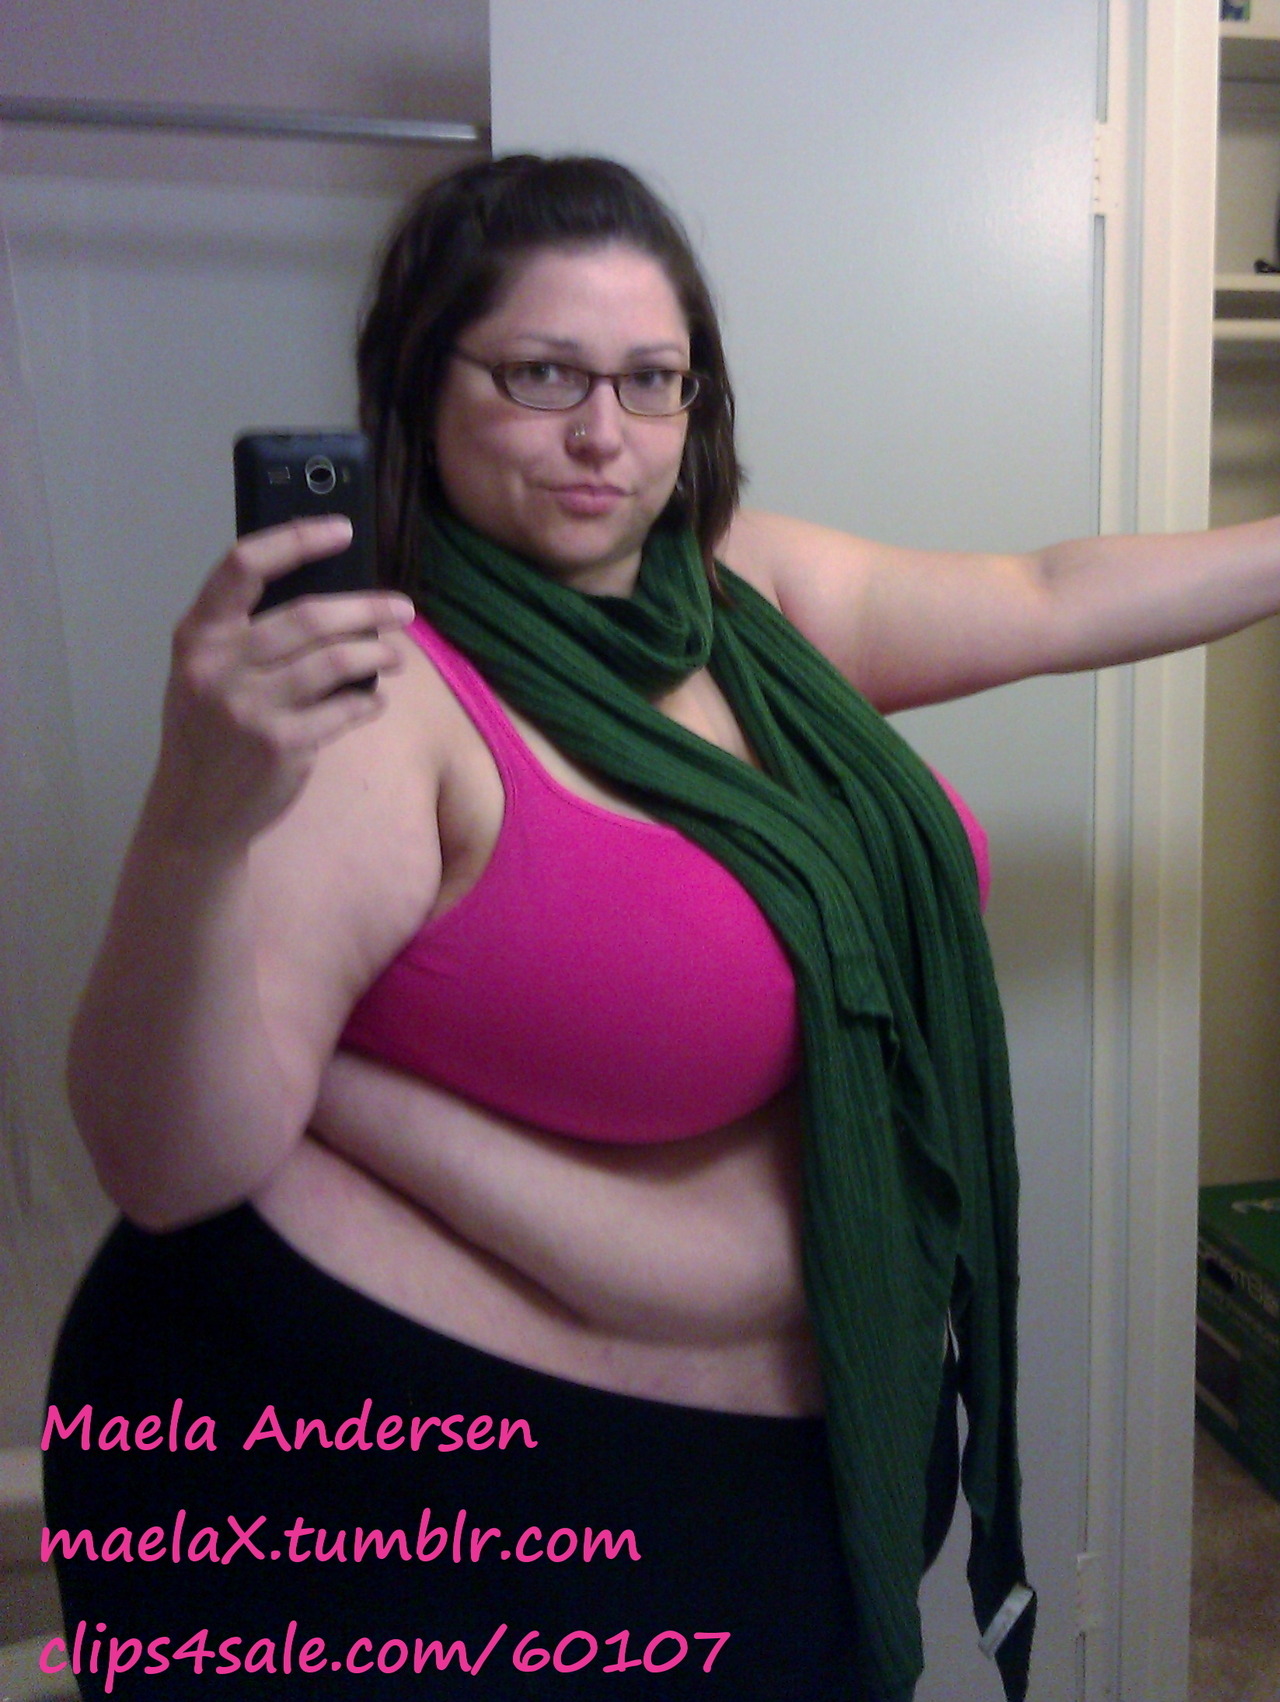 miss-maela:I love pink &amp; green together! My sister bought me this gorgeous